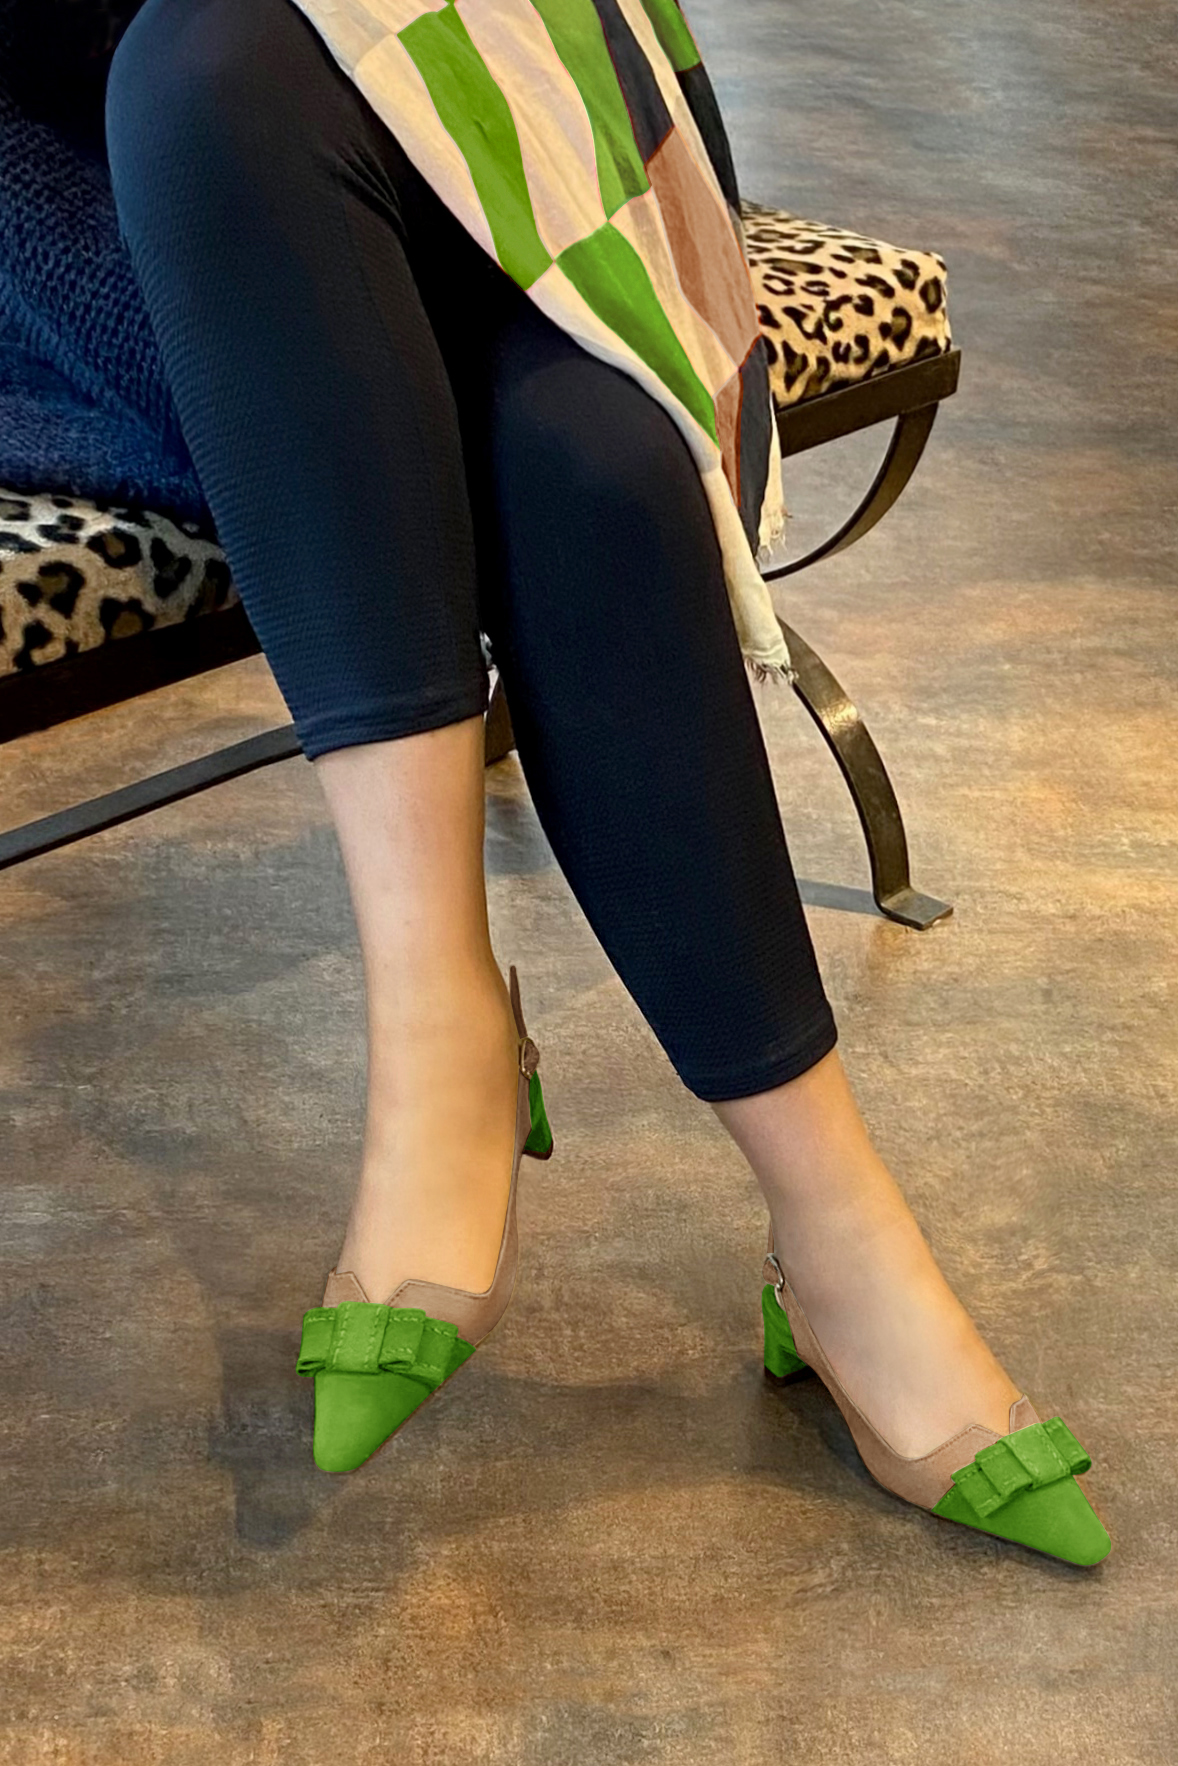 Grass green and tan beige women's open back shoes, with a knot. Tapered toe. Low kitten heels. Worn view - Florence KOOIJMAN